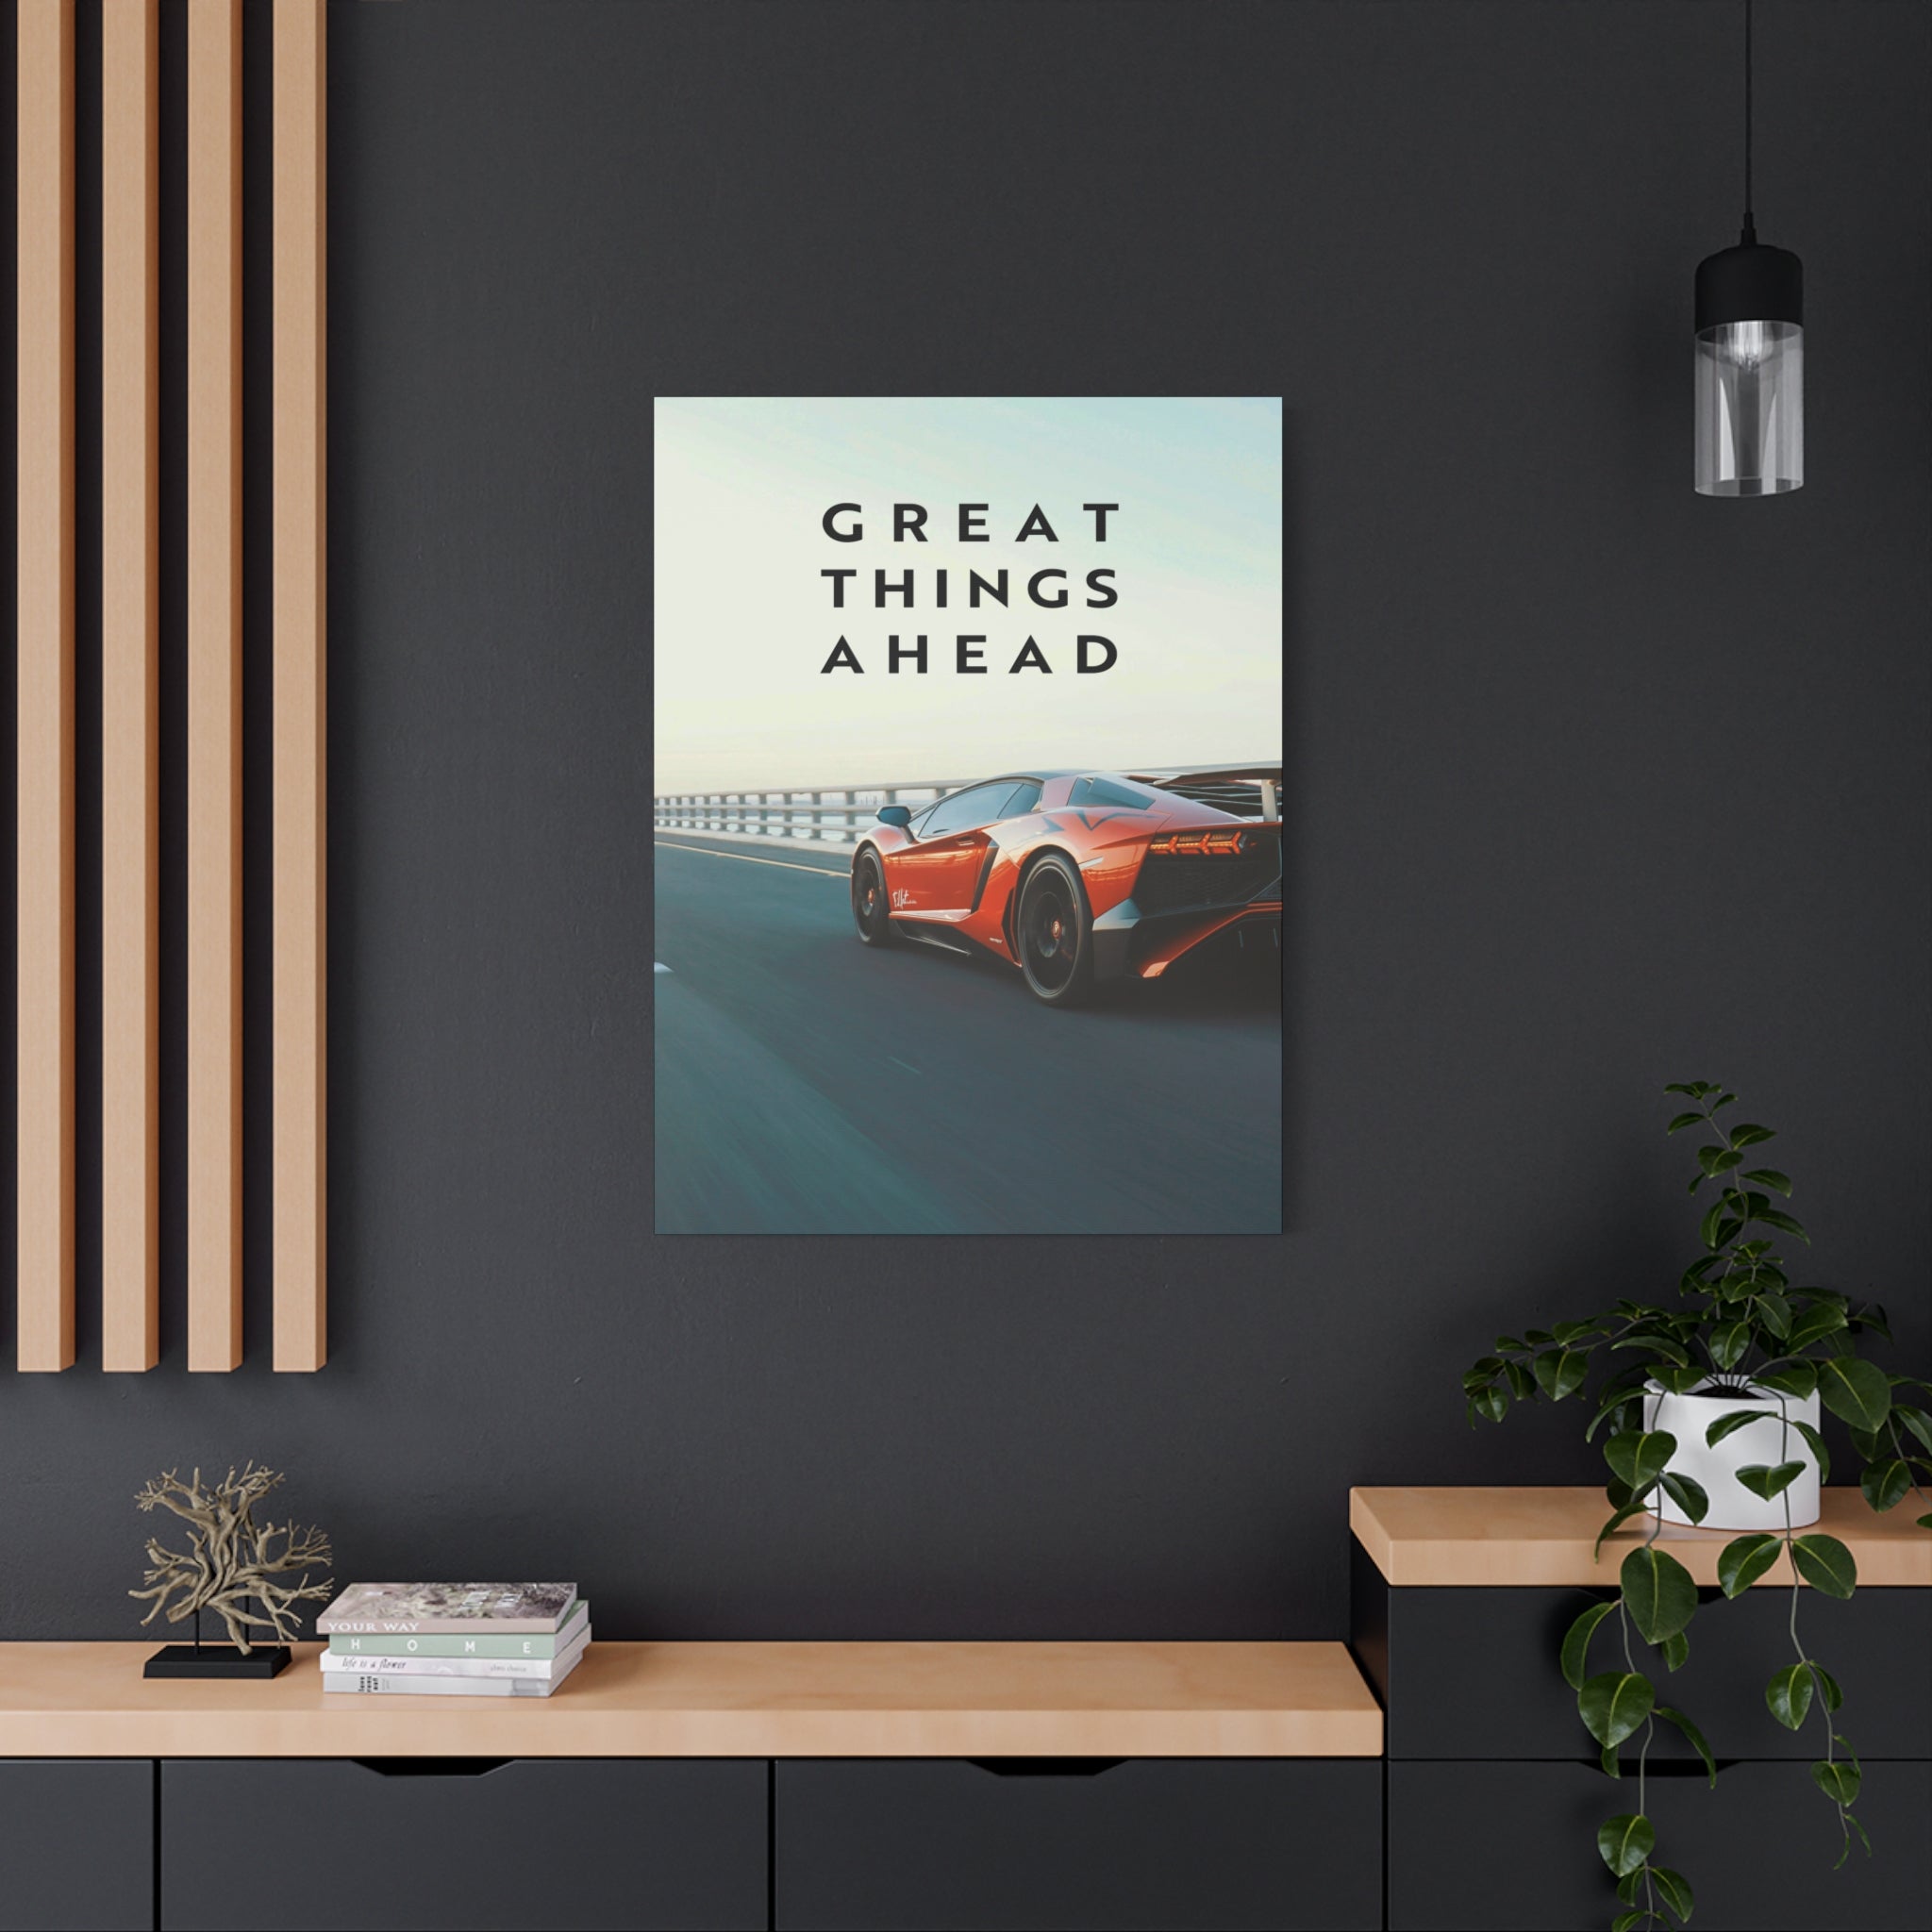 Great Things Ahead - Sports Car - Wall Art additional image 3